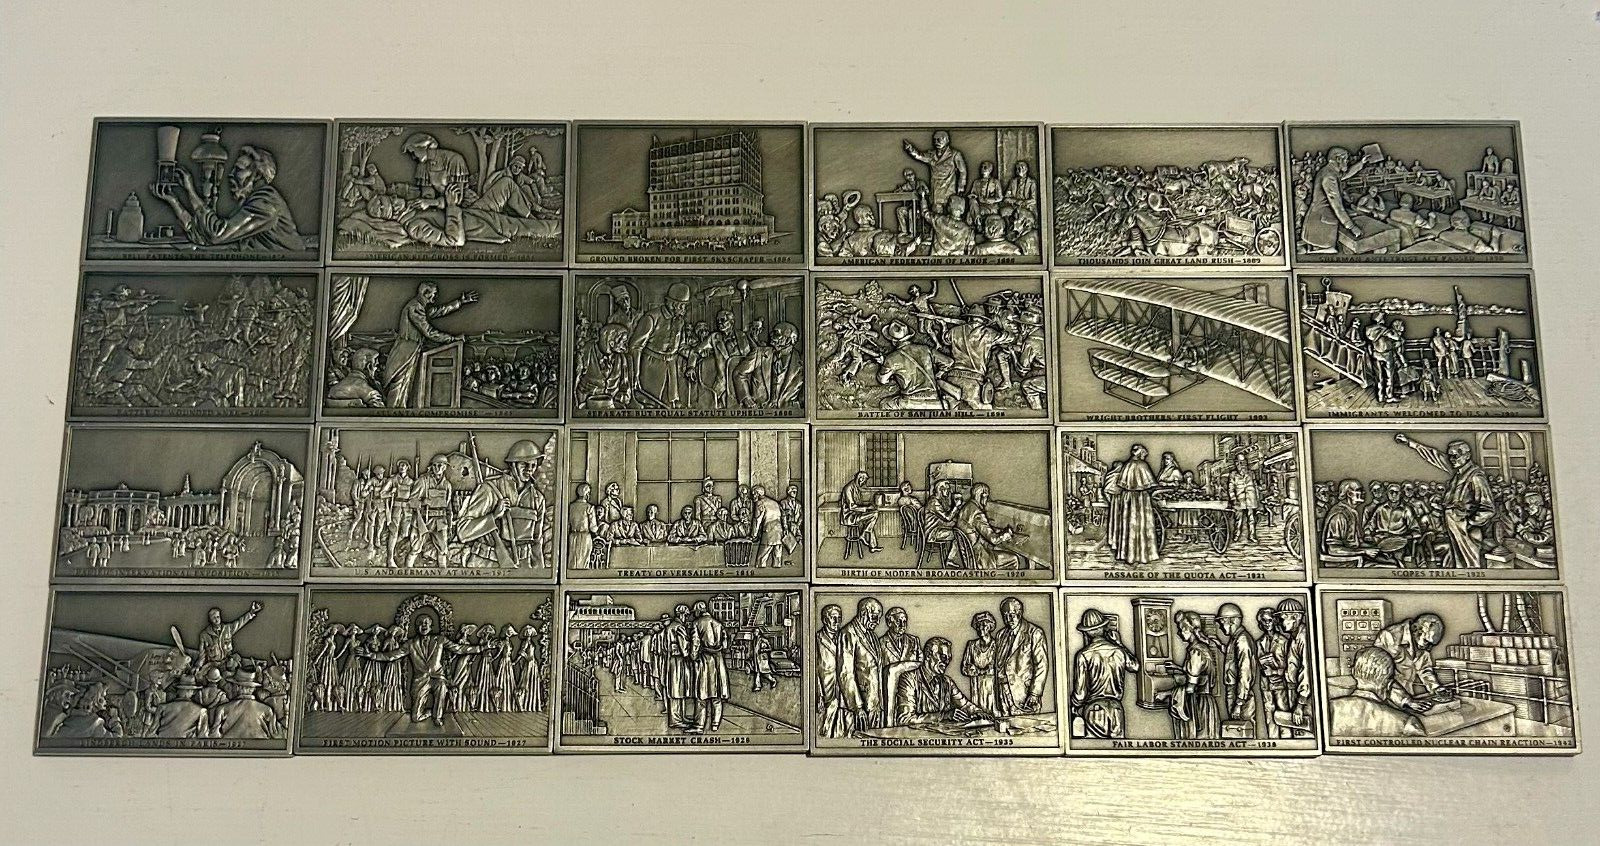 Franklin Mint Bicentennial History of the US - PEWTER - Lot of 24 Ingots - 1970s